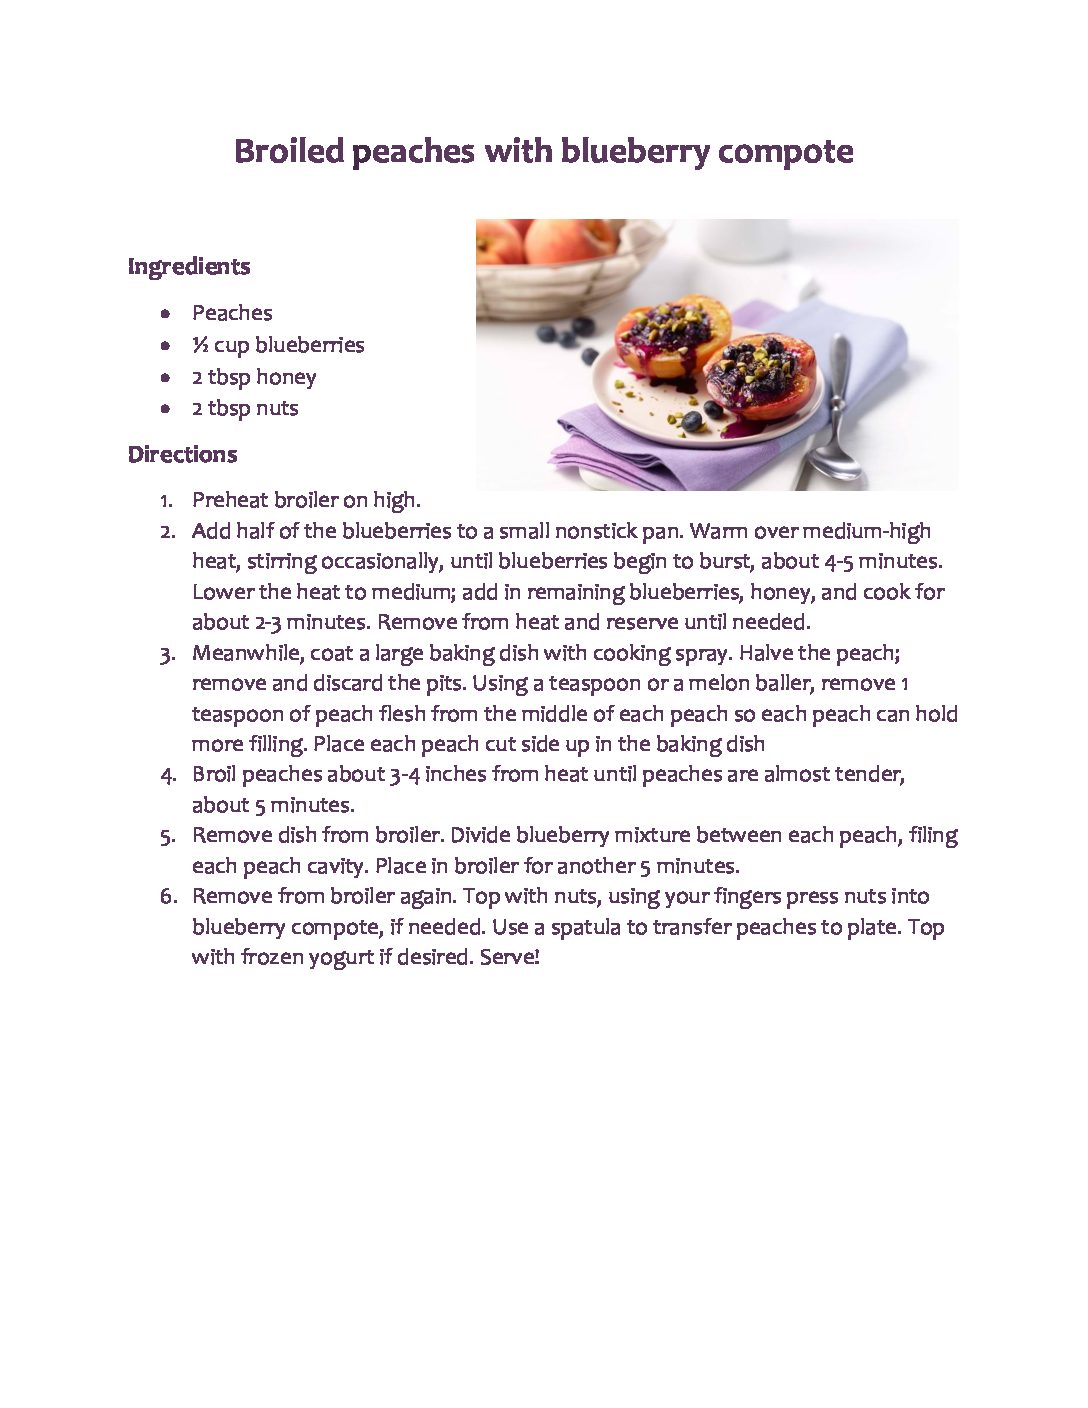 Broiled Peaches with Blueberry Compote - Coastal Bend Food Bank